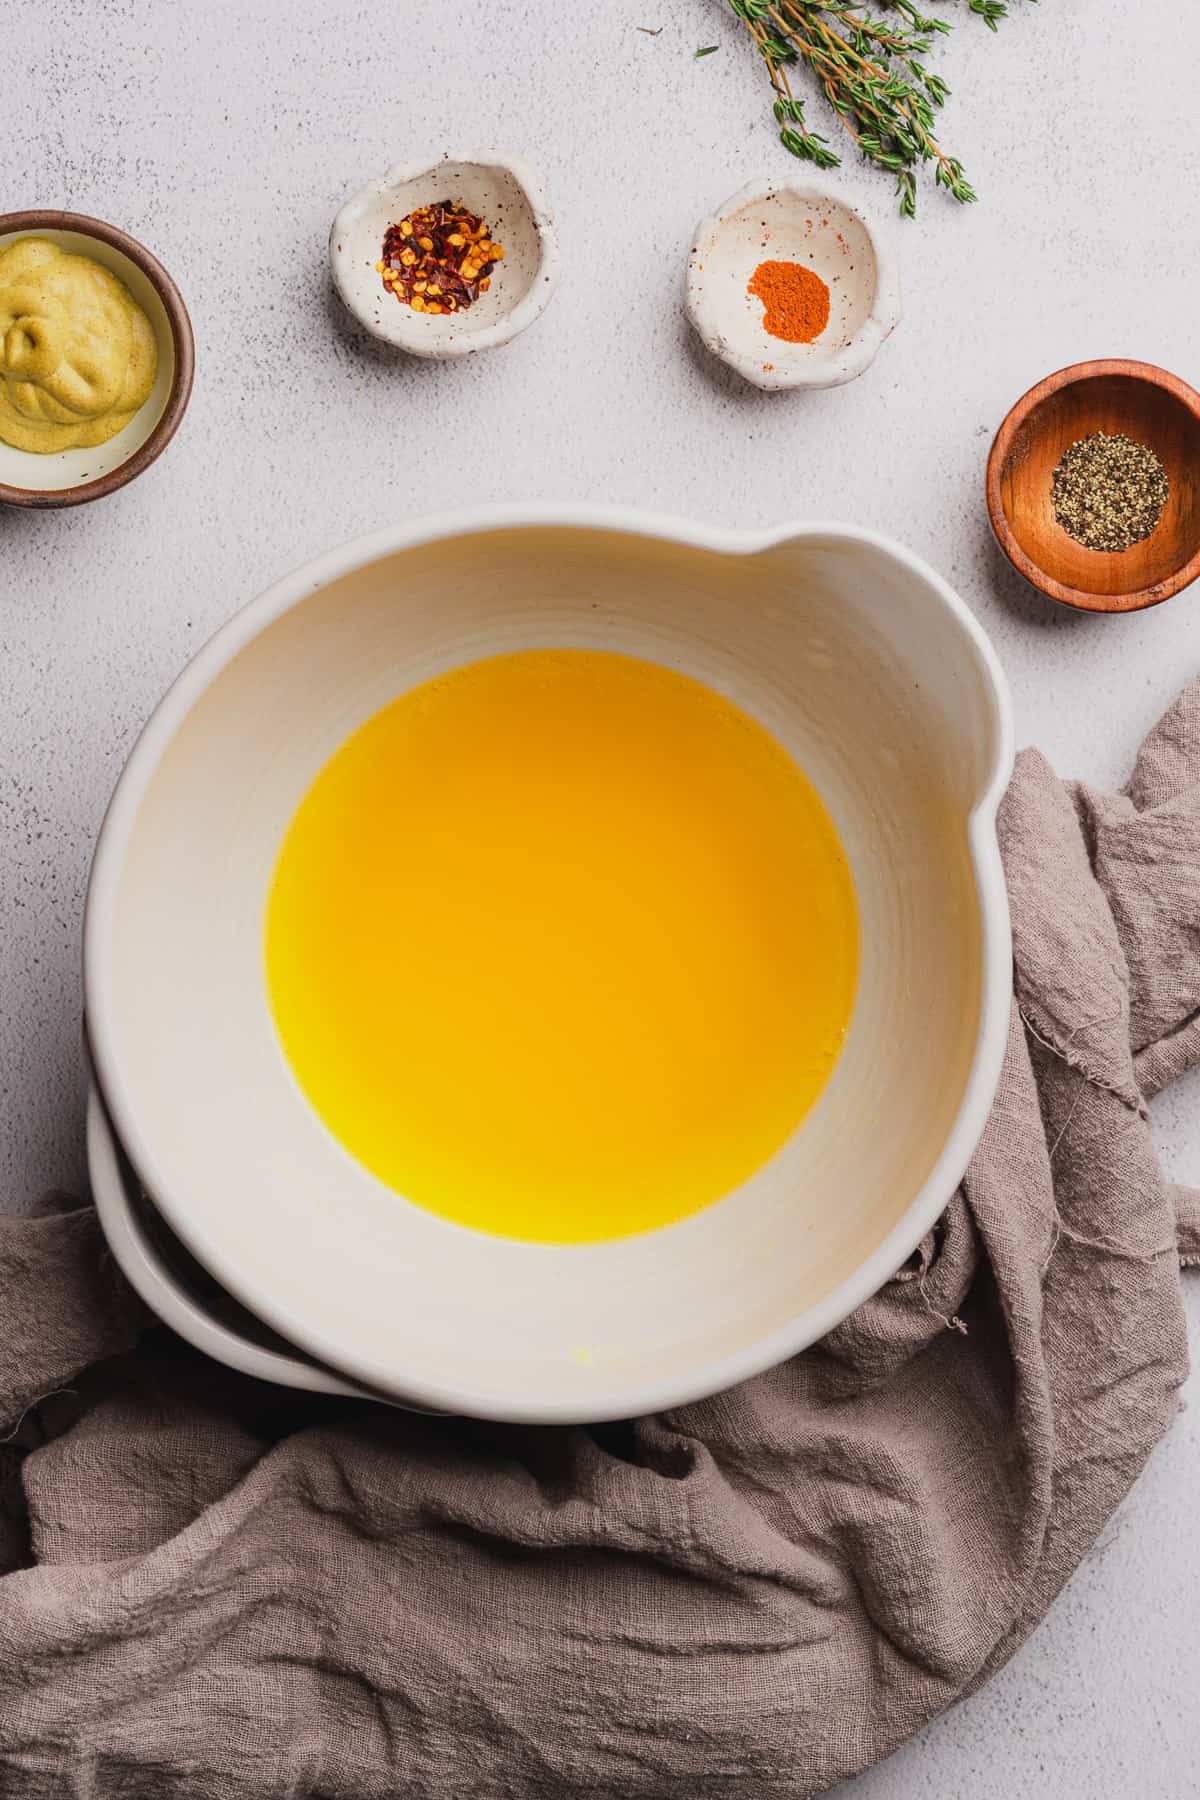 melted butter in a ceramic white mixing bowl surrounded by seasonings.  